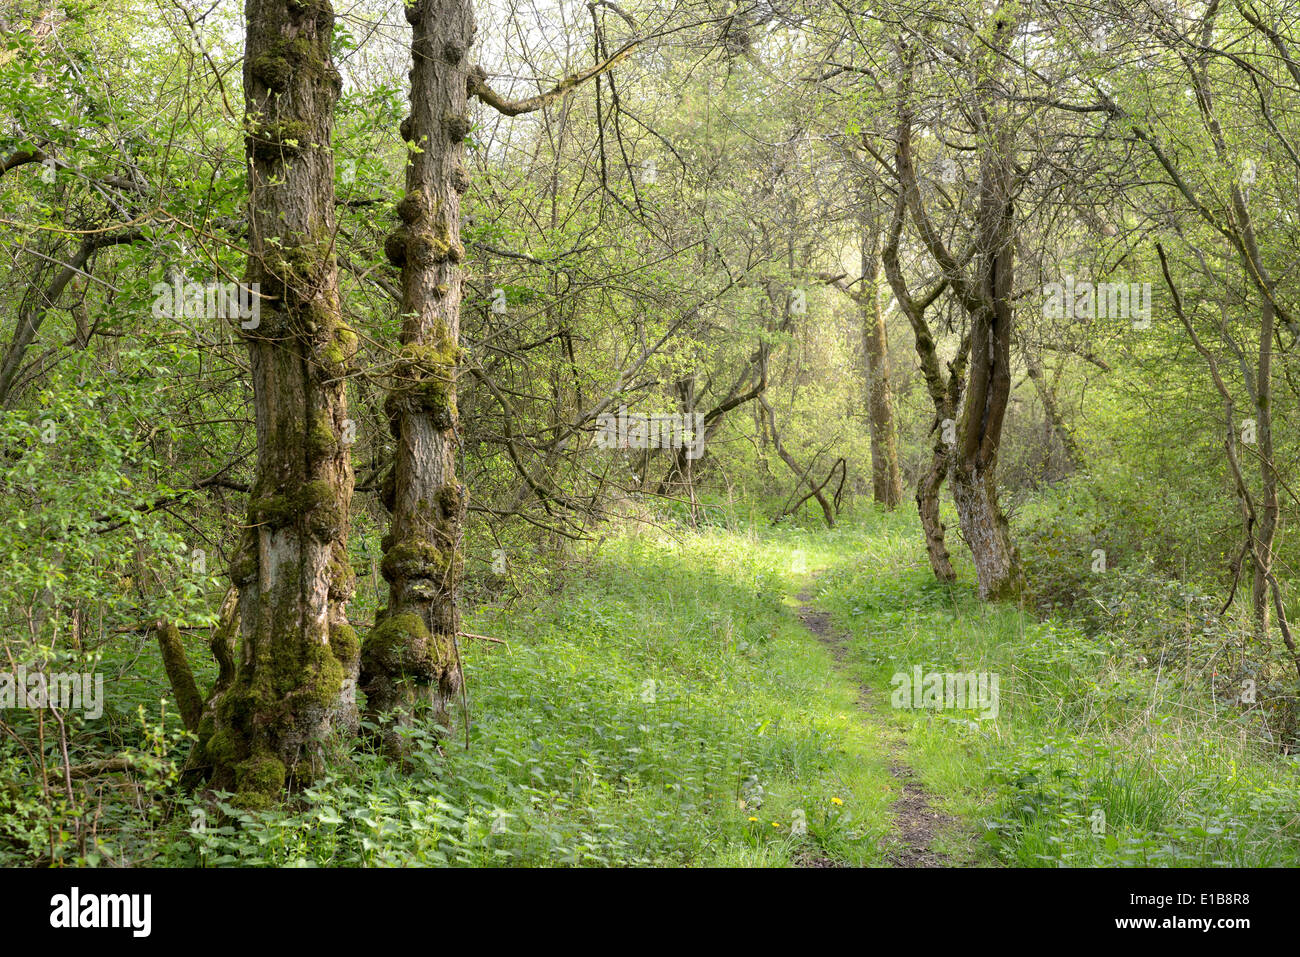 Sheephouse Wood near Steeple Claydon  on the line of the proposed HS2 rail route.  April 24th 2014 Stock Photo